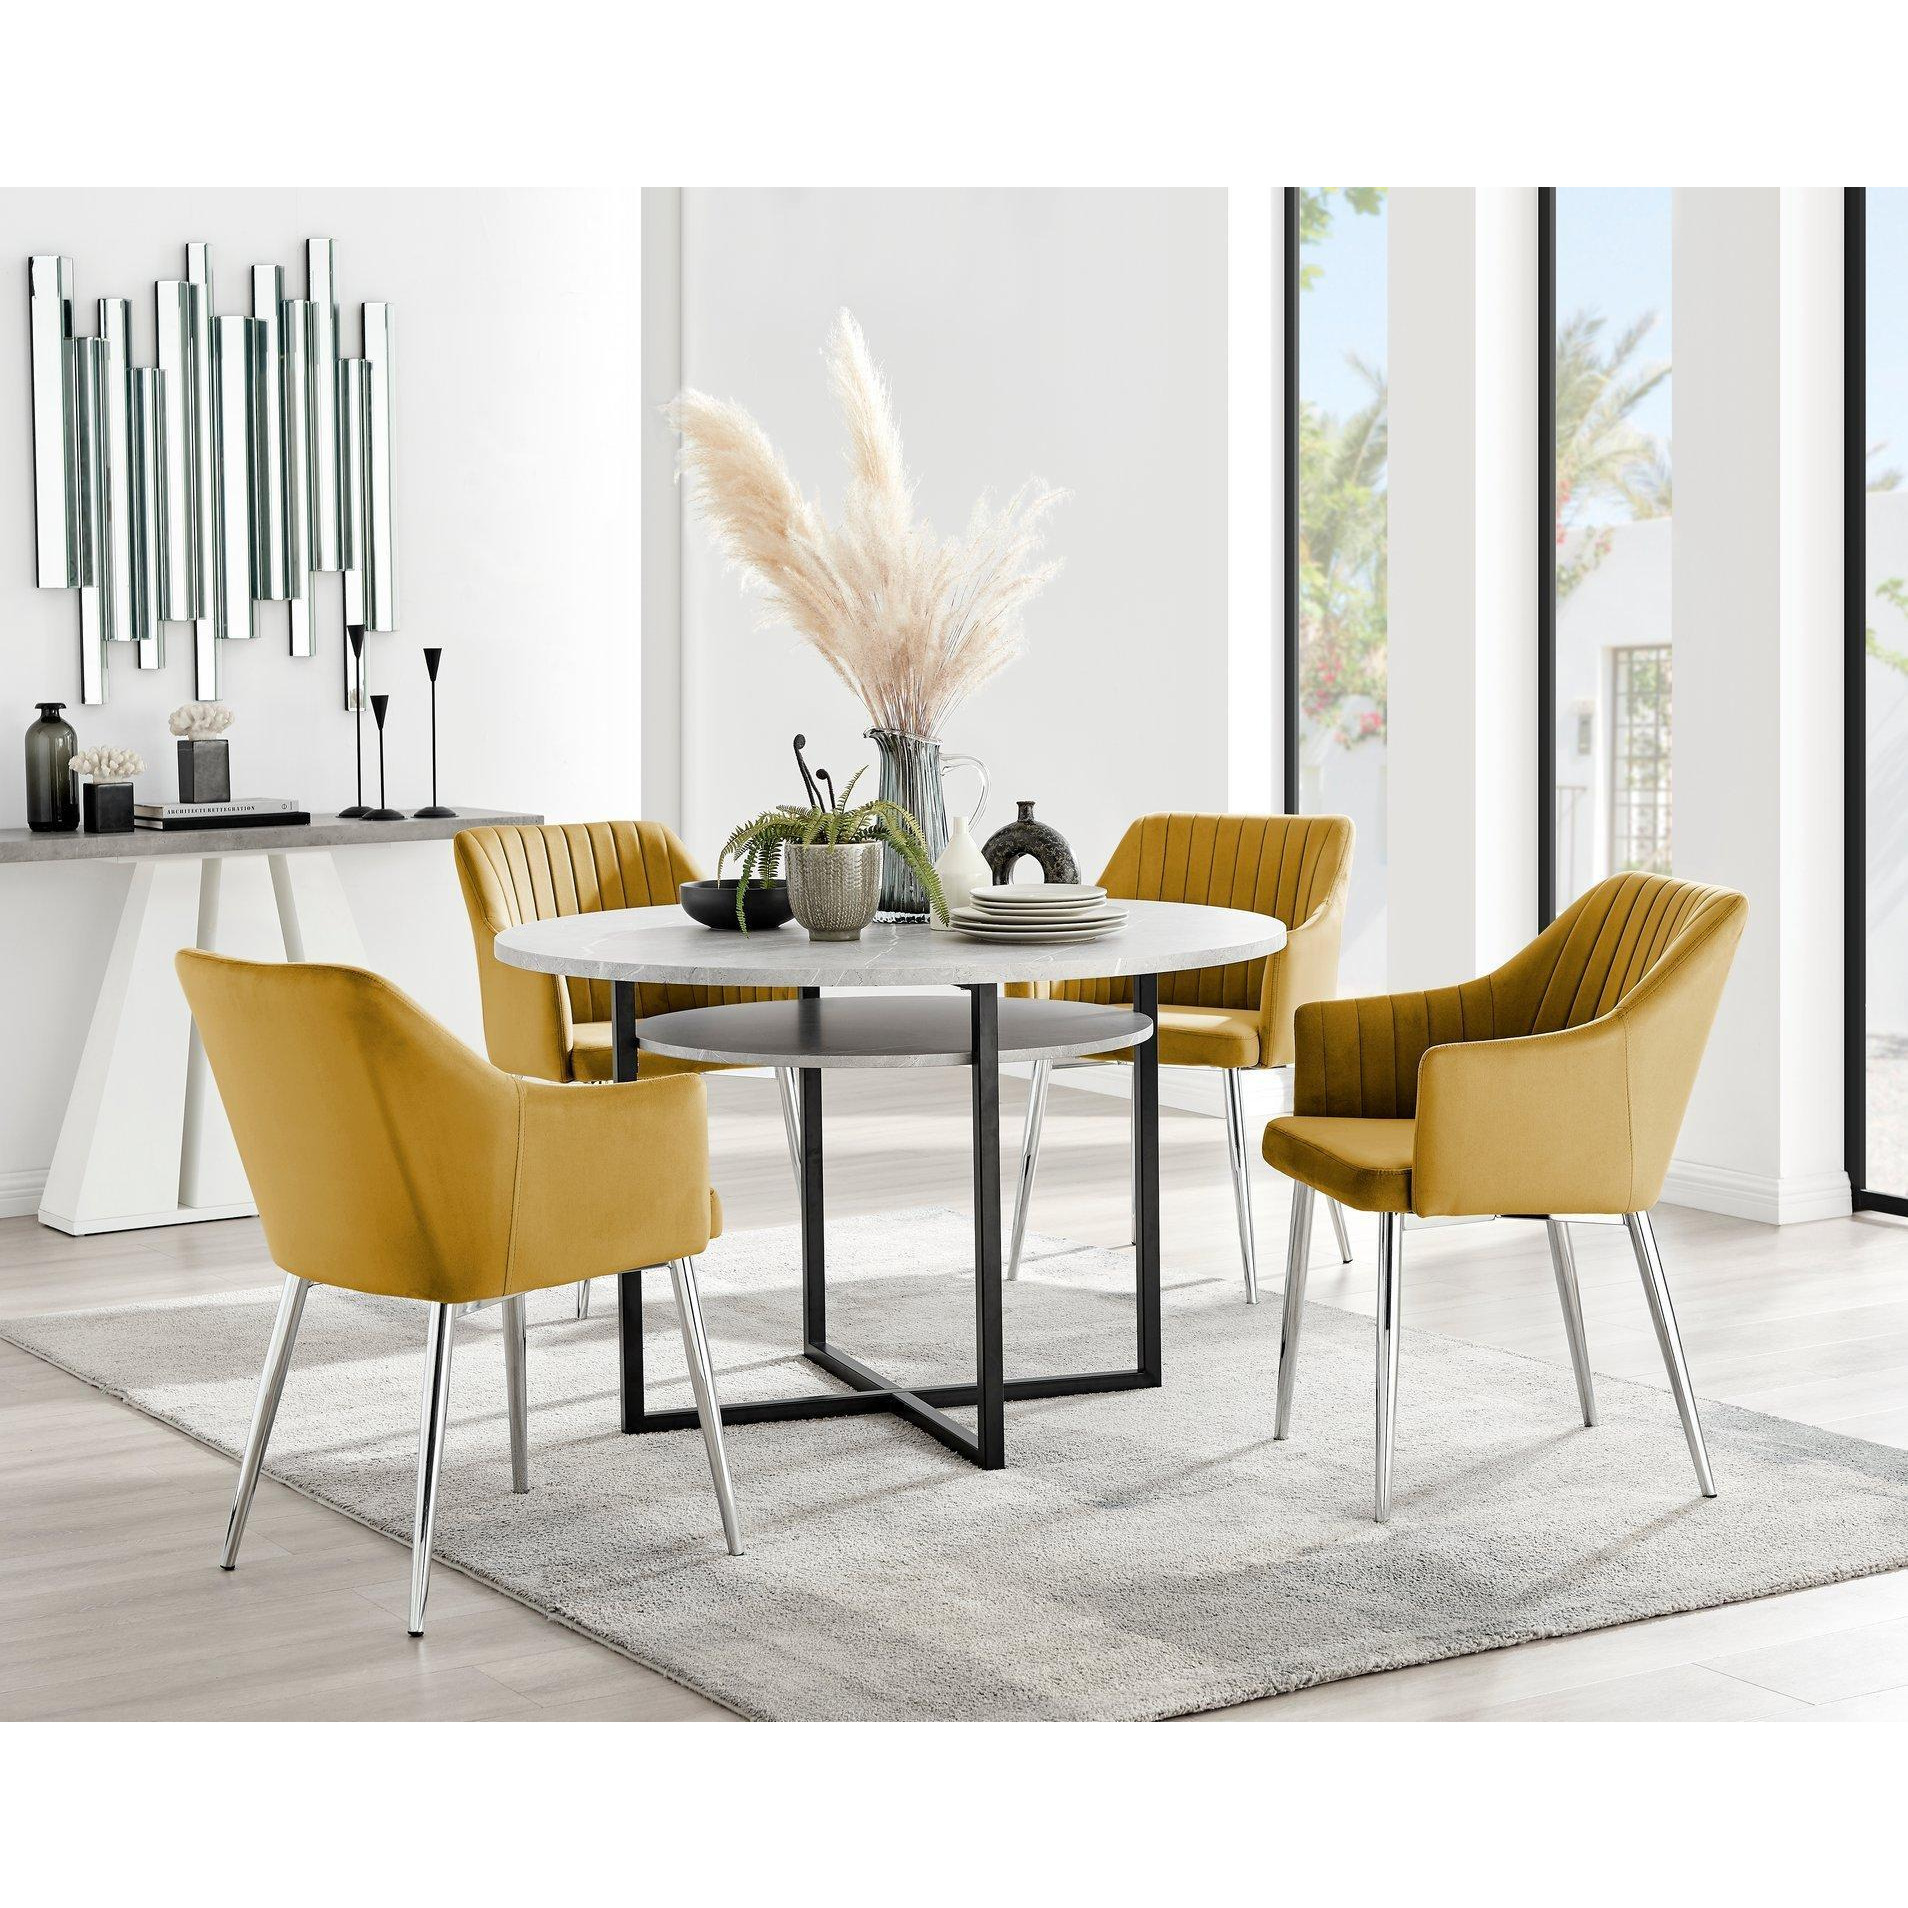 Adley Grey Concrete Effect Round Dining Table & 4 Calla Silver Leg Velvet Chairs - image 1